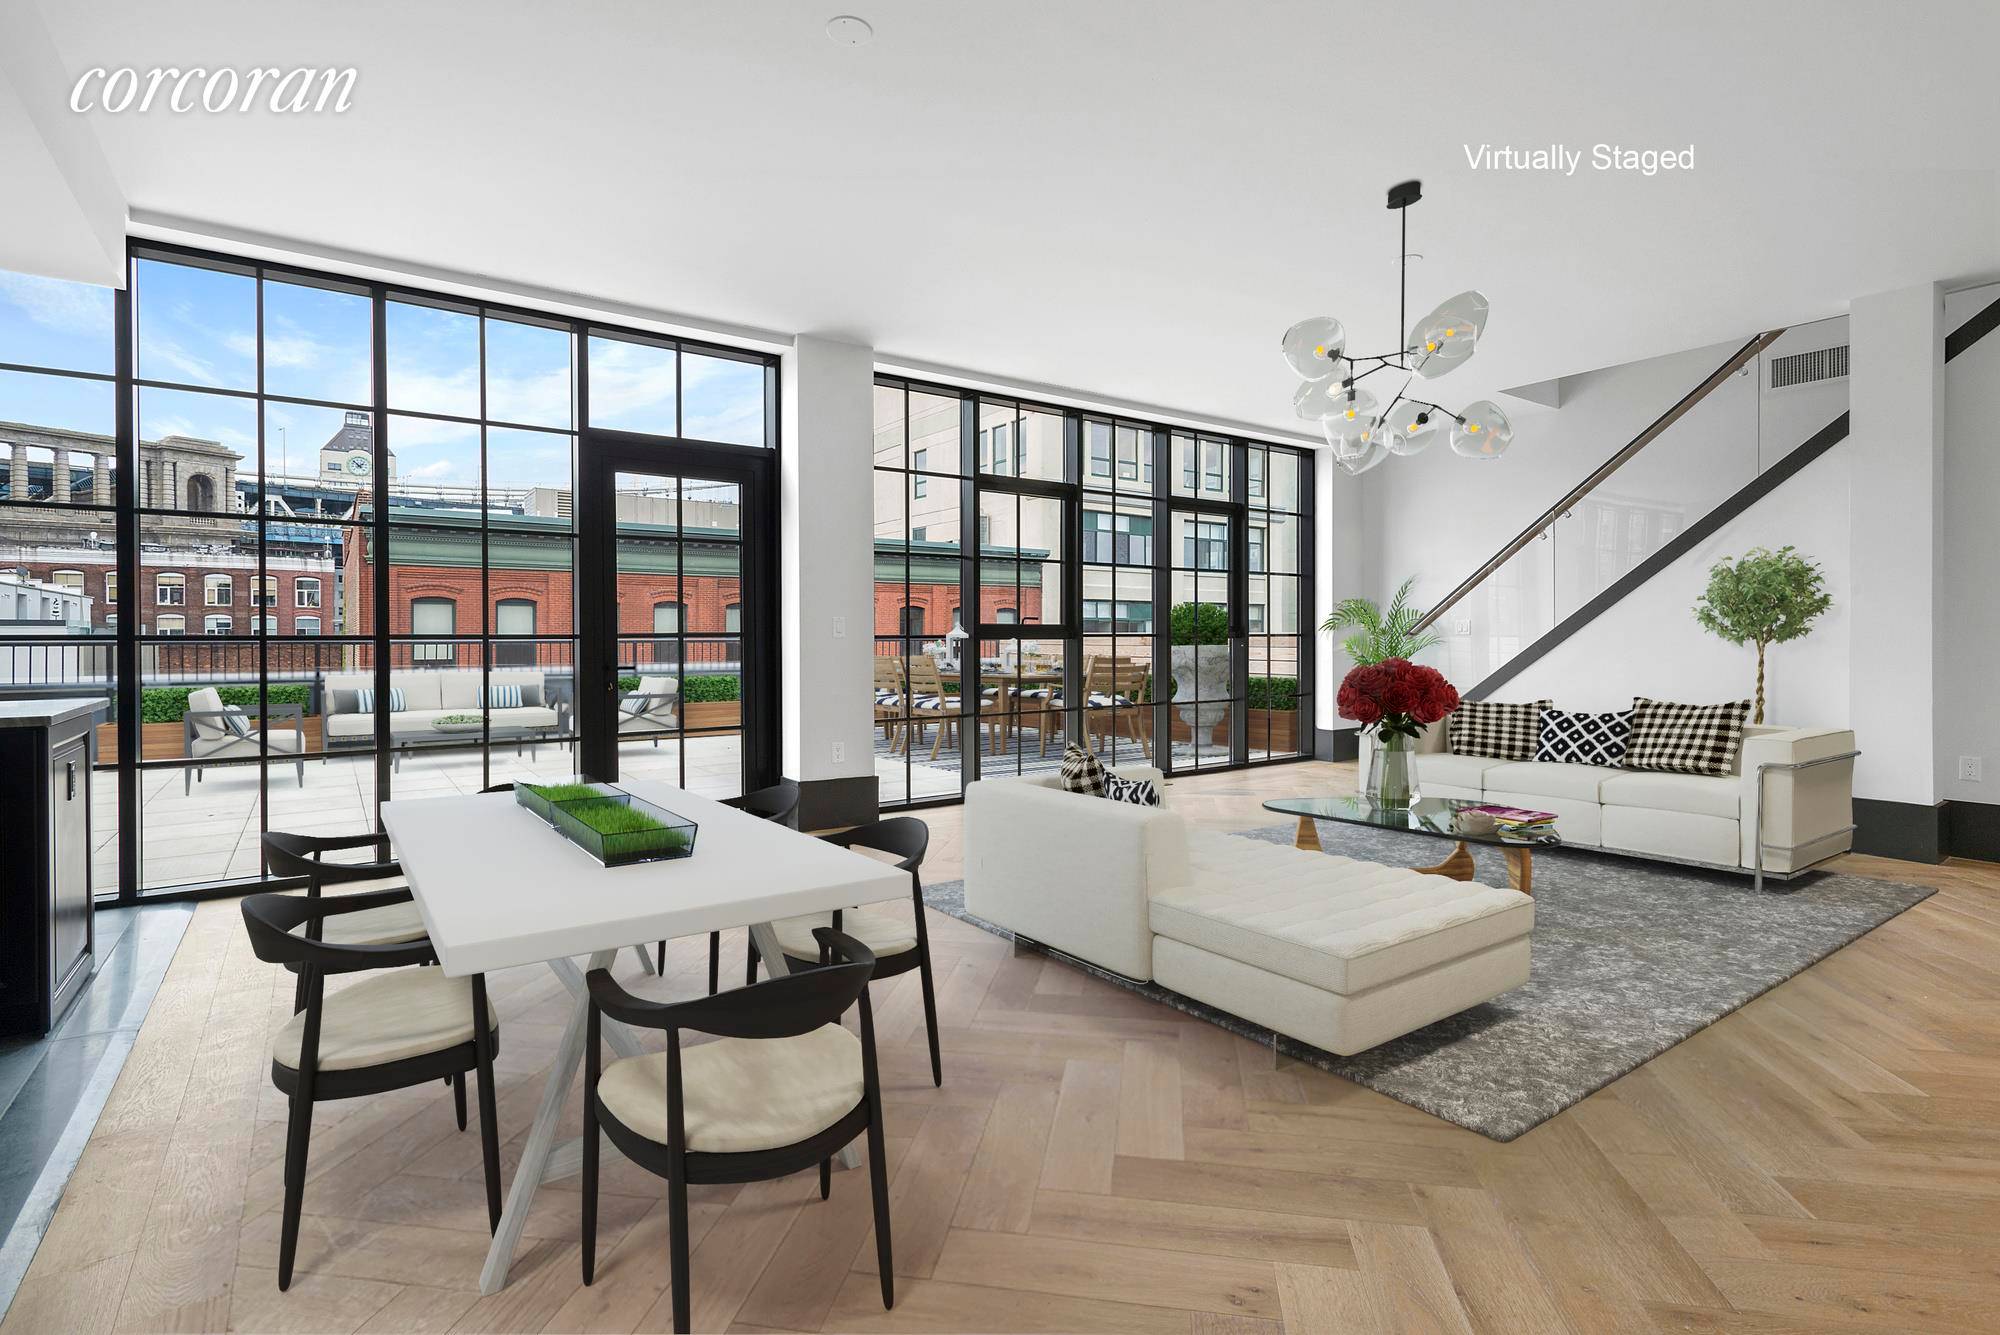 3 Bedroom 4 Bath Duplex Penthouse with Amazing Private Terrace and Garage Parking Space in Dumbo's Nicest and Full Service Luxury Building 51 Jay Street.